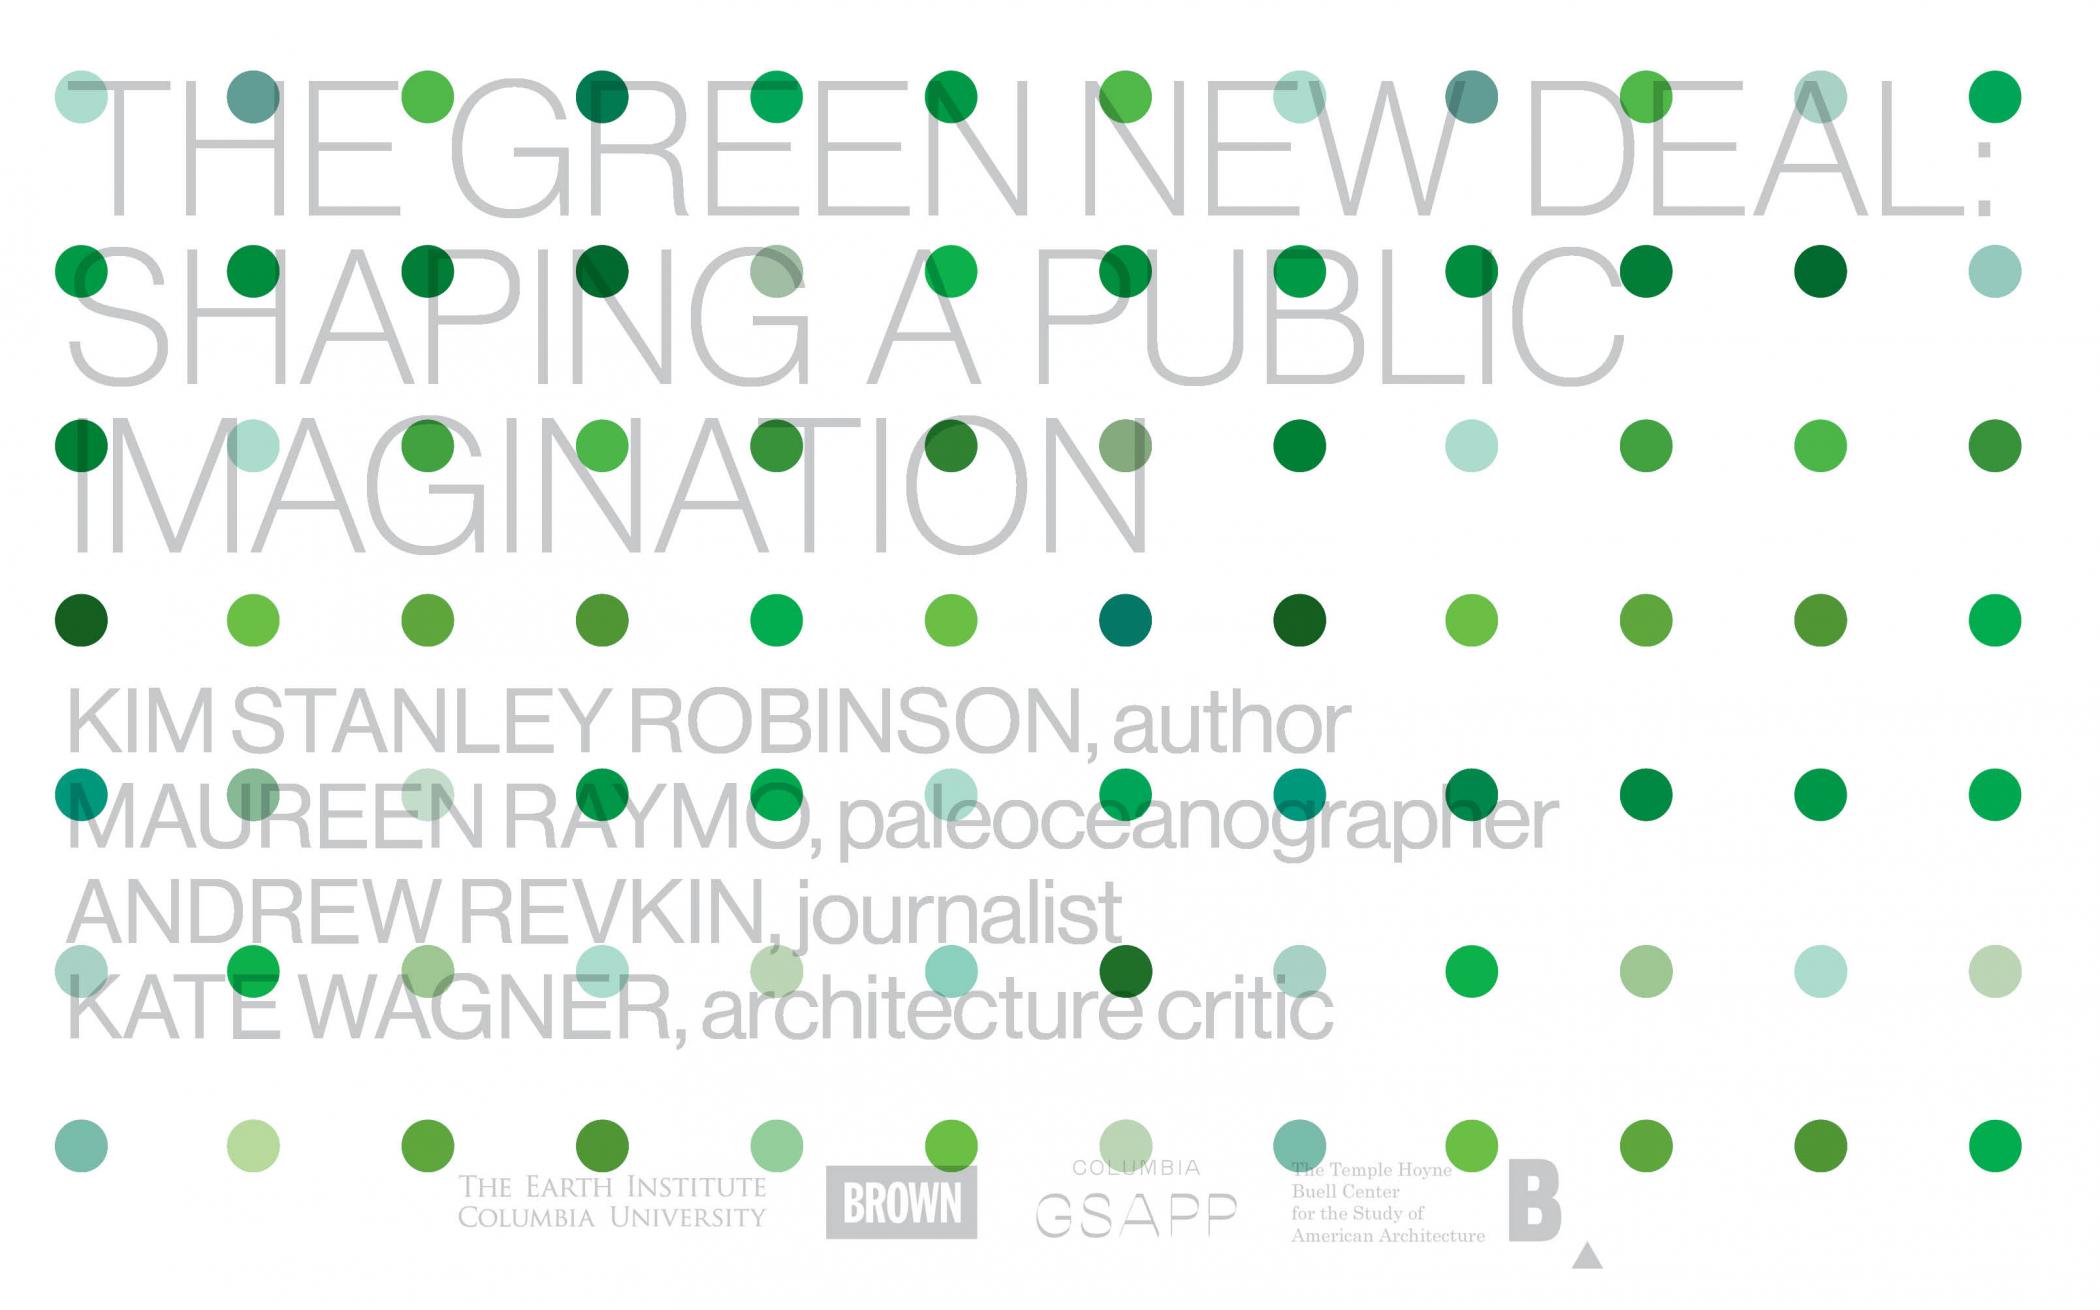 A grid of variously green dots overlays the event title and participant names, in grey